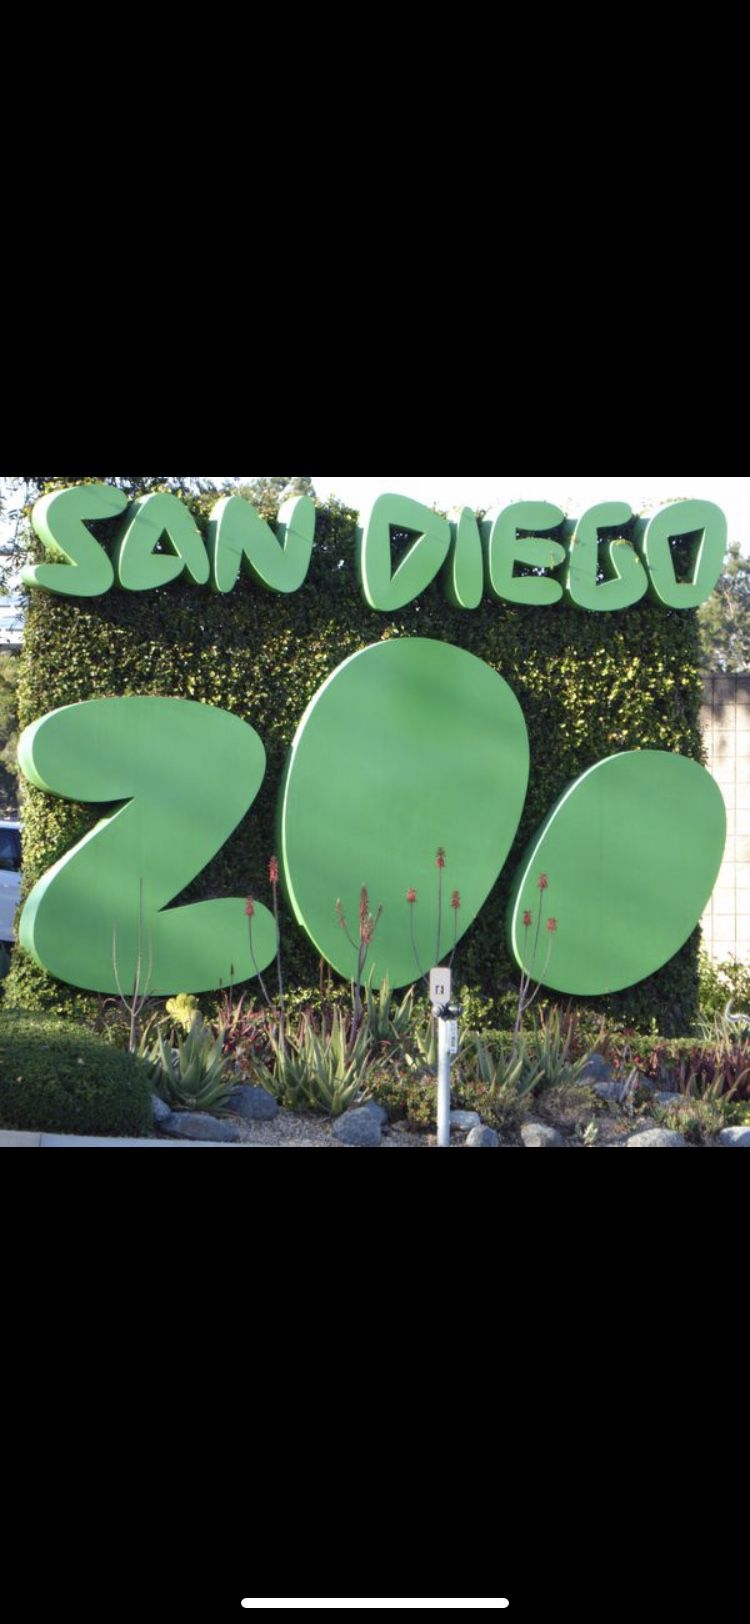 WANTED: 4 San Diego Zoo Tickets for Today SUNDAY 20th Am!. 😱🙆🏻‍♂️🤔cheap and legit!. Cash on hand ! 😎🤙🏼